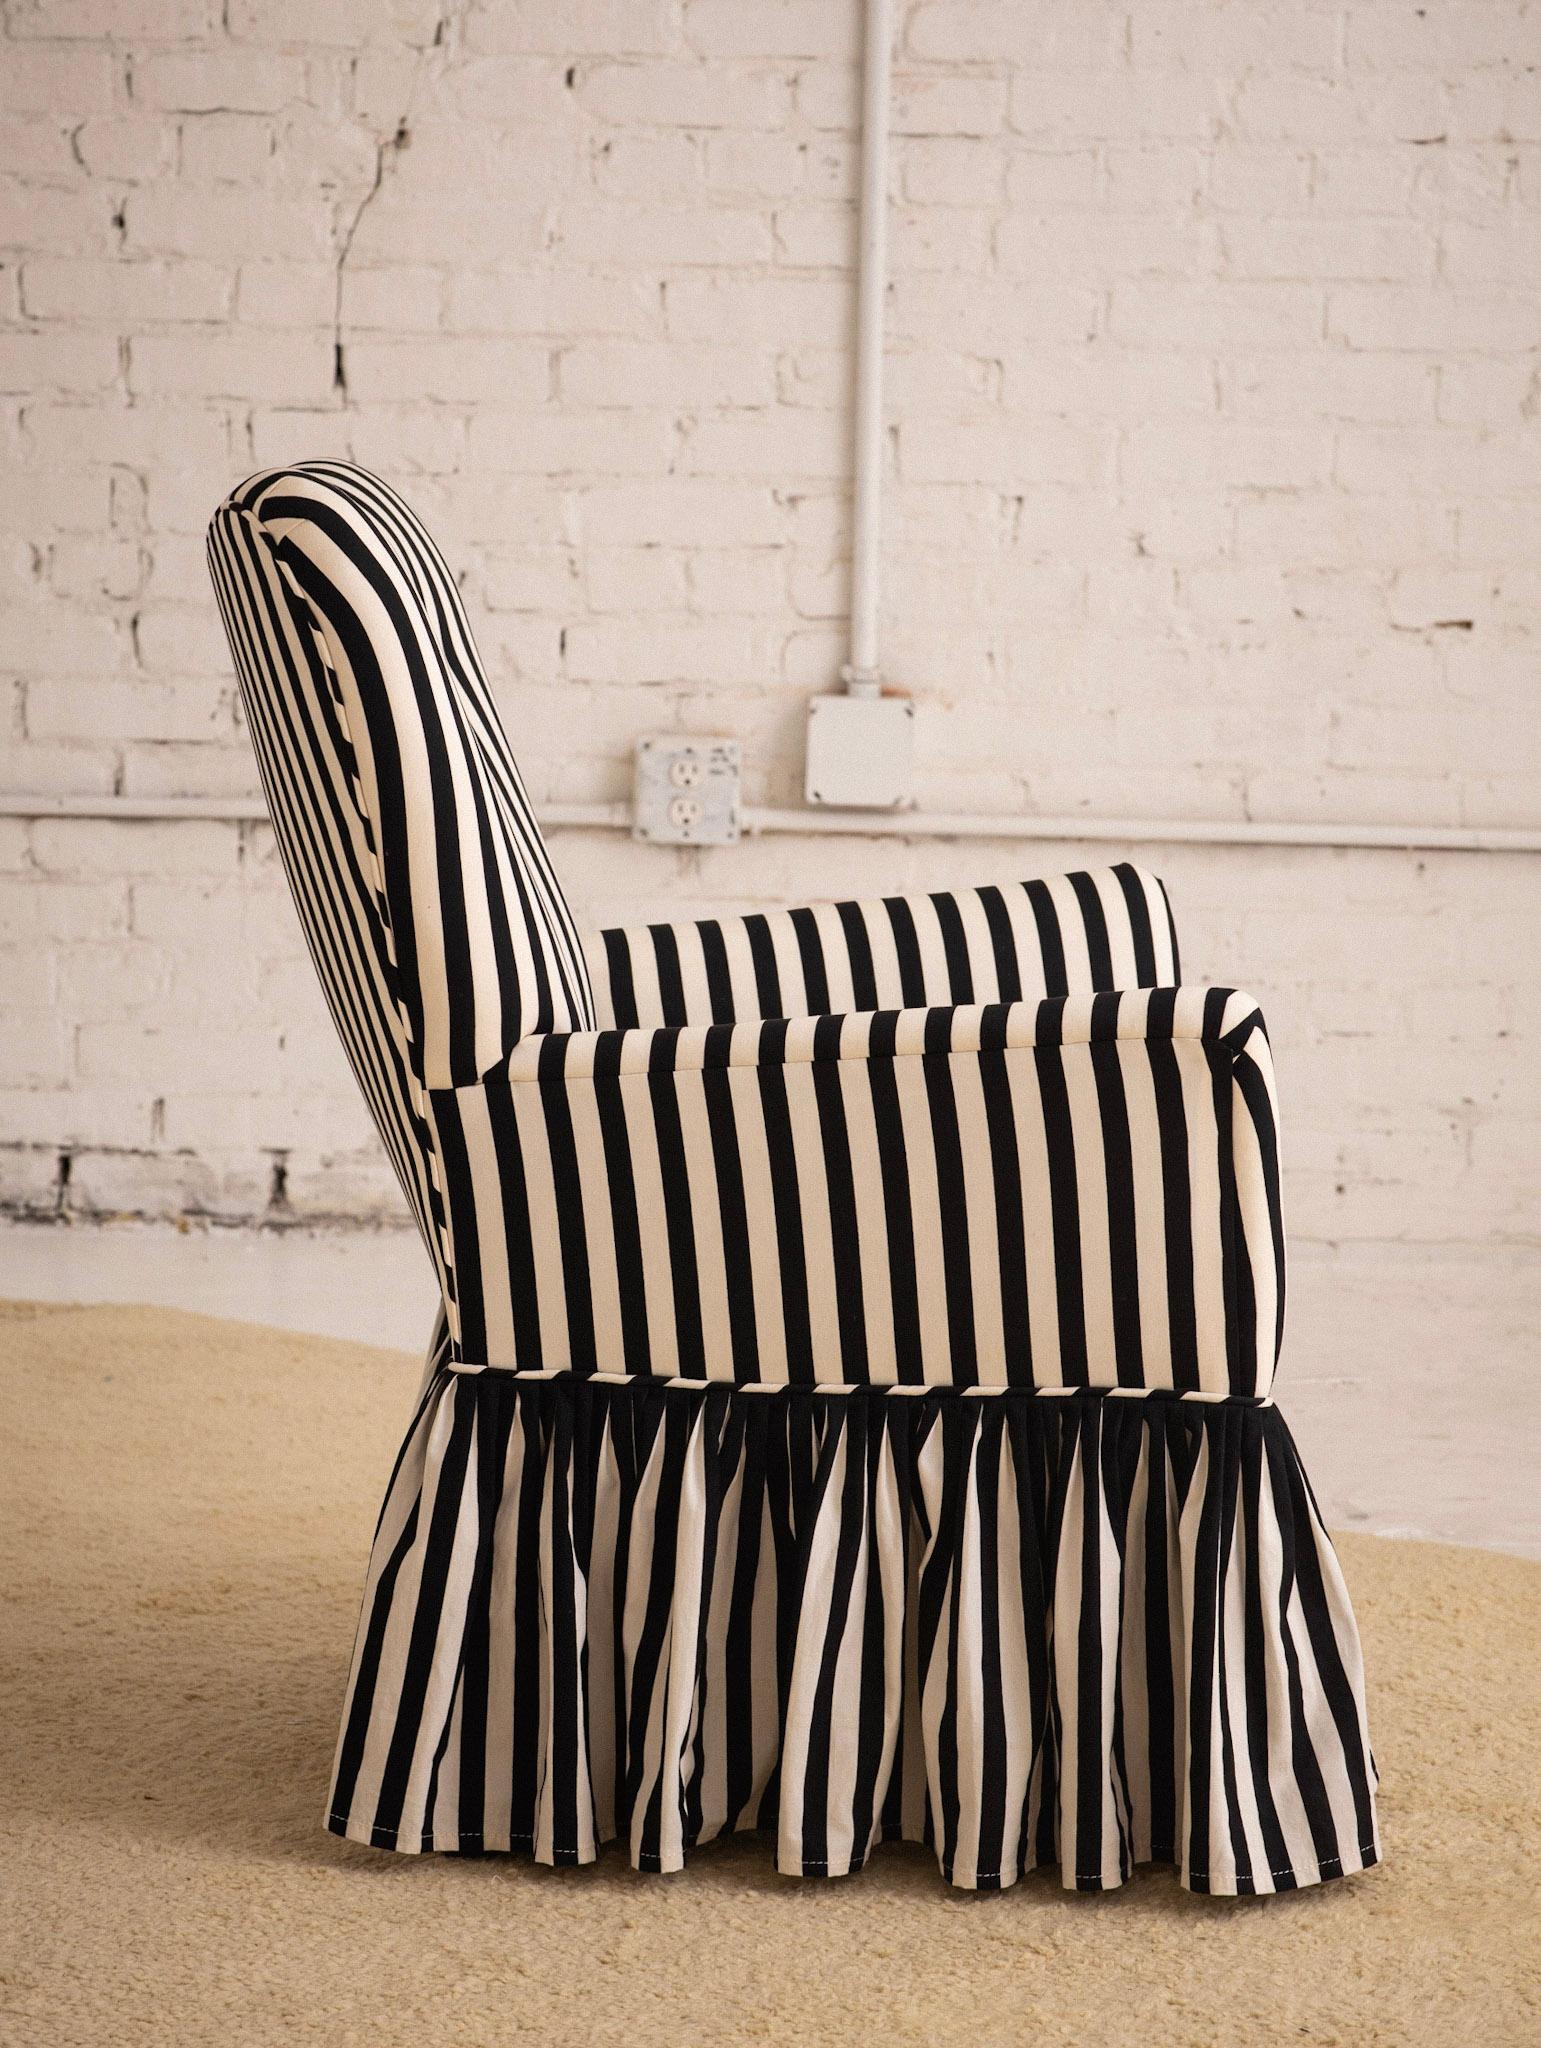 Upholstery Mid Century Accent Chair in Black and White Stripe with Ruffle Skirt